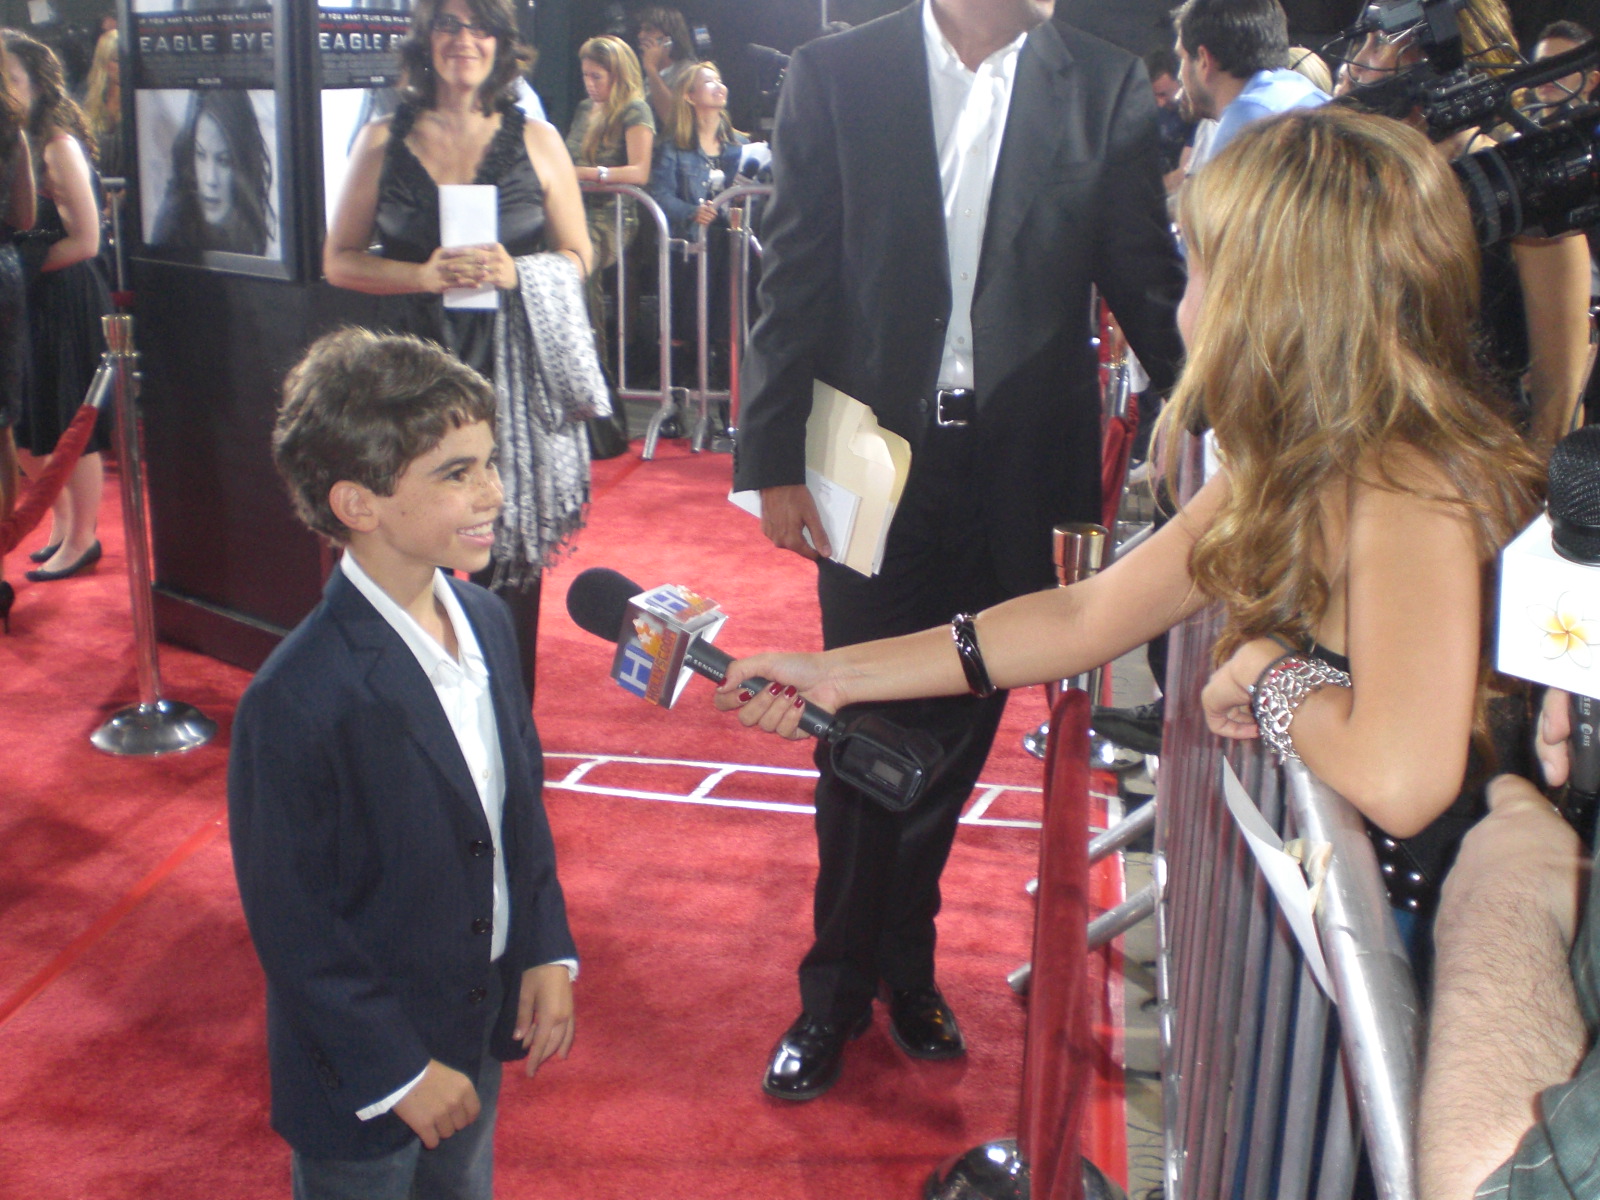 Eagle Eye premiere at Manns Chinese Theater 2008